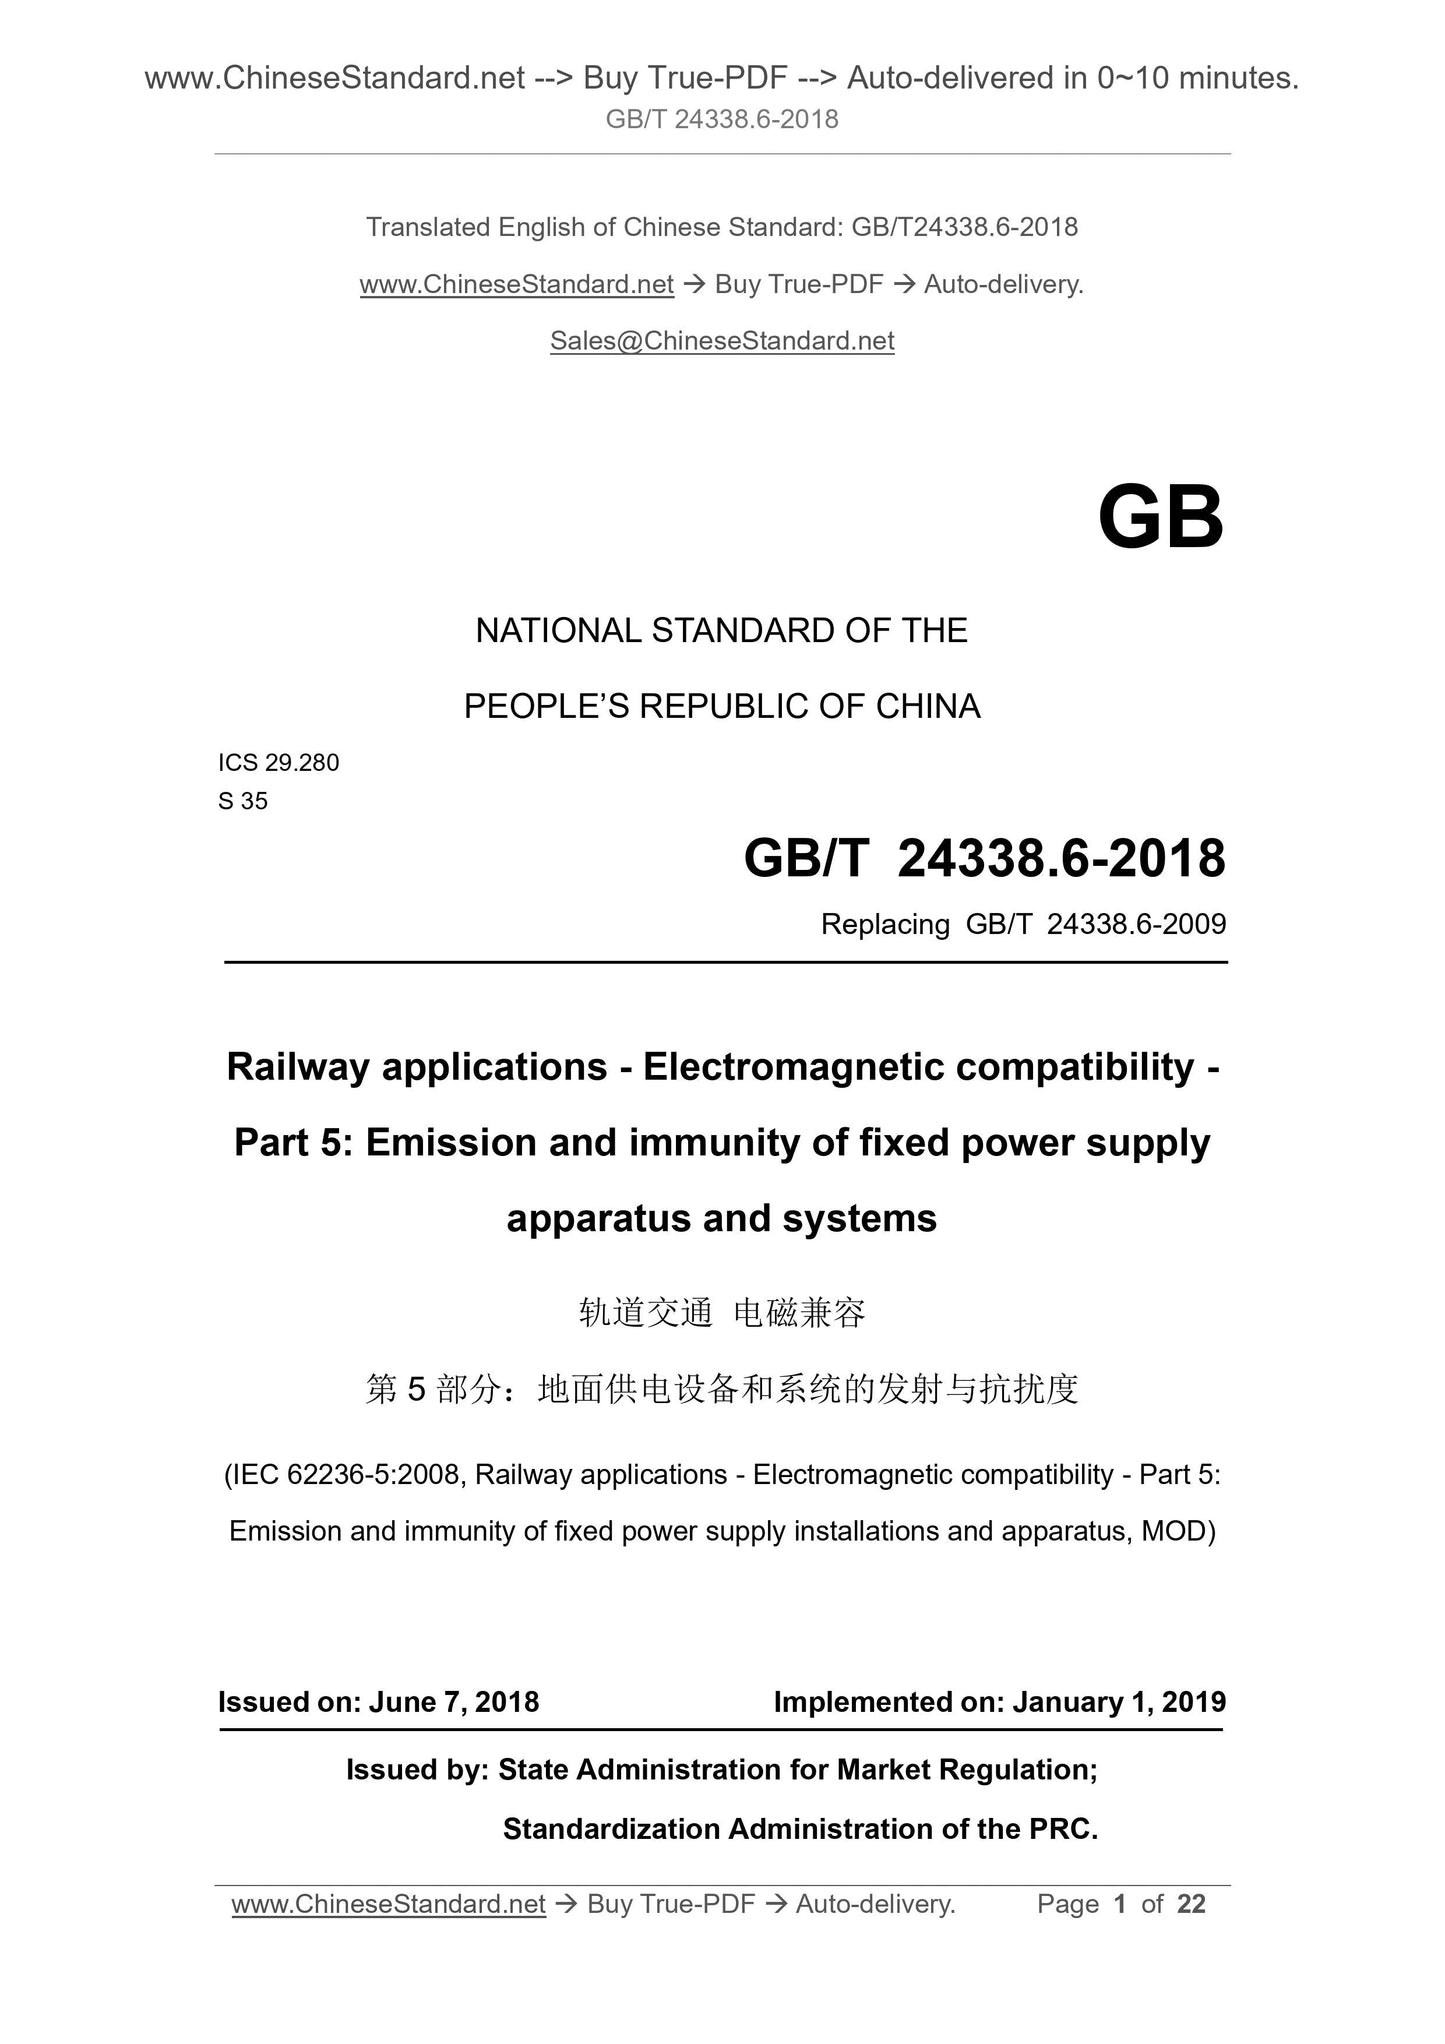 GB/T 24338.6-2018 Page 1